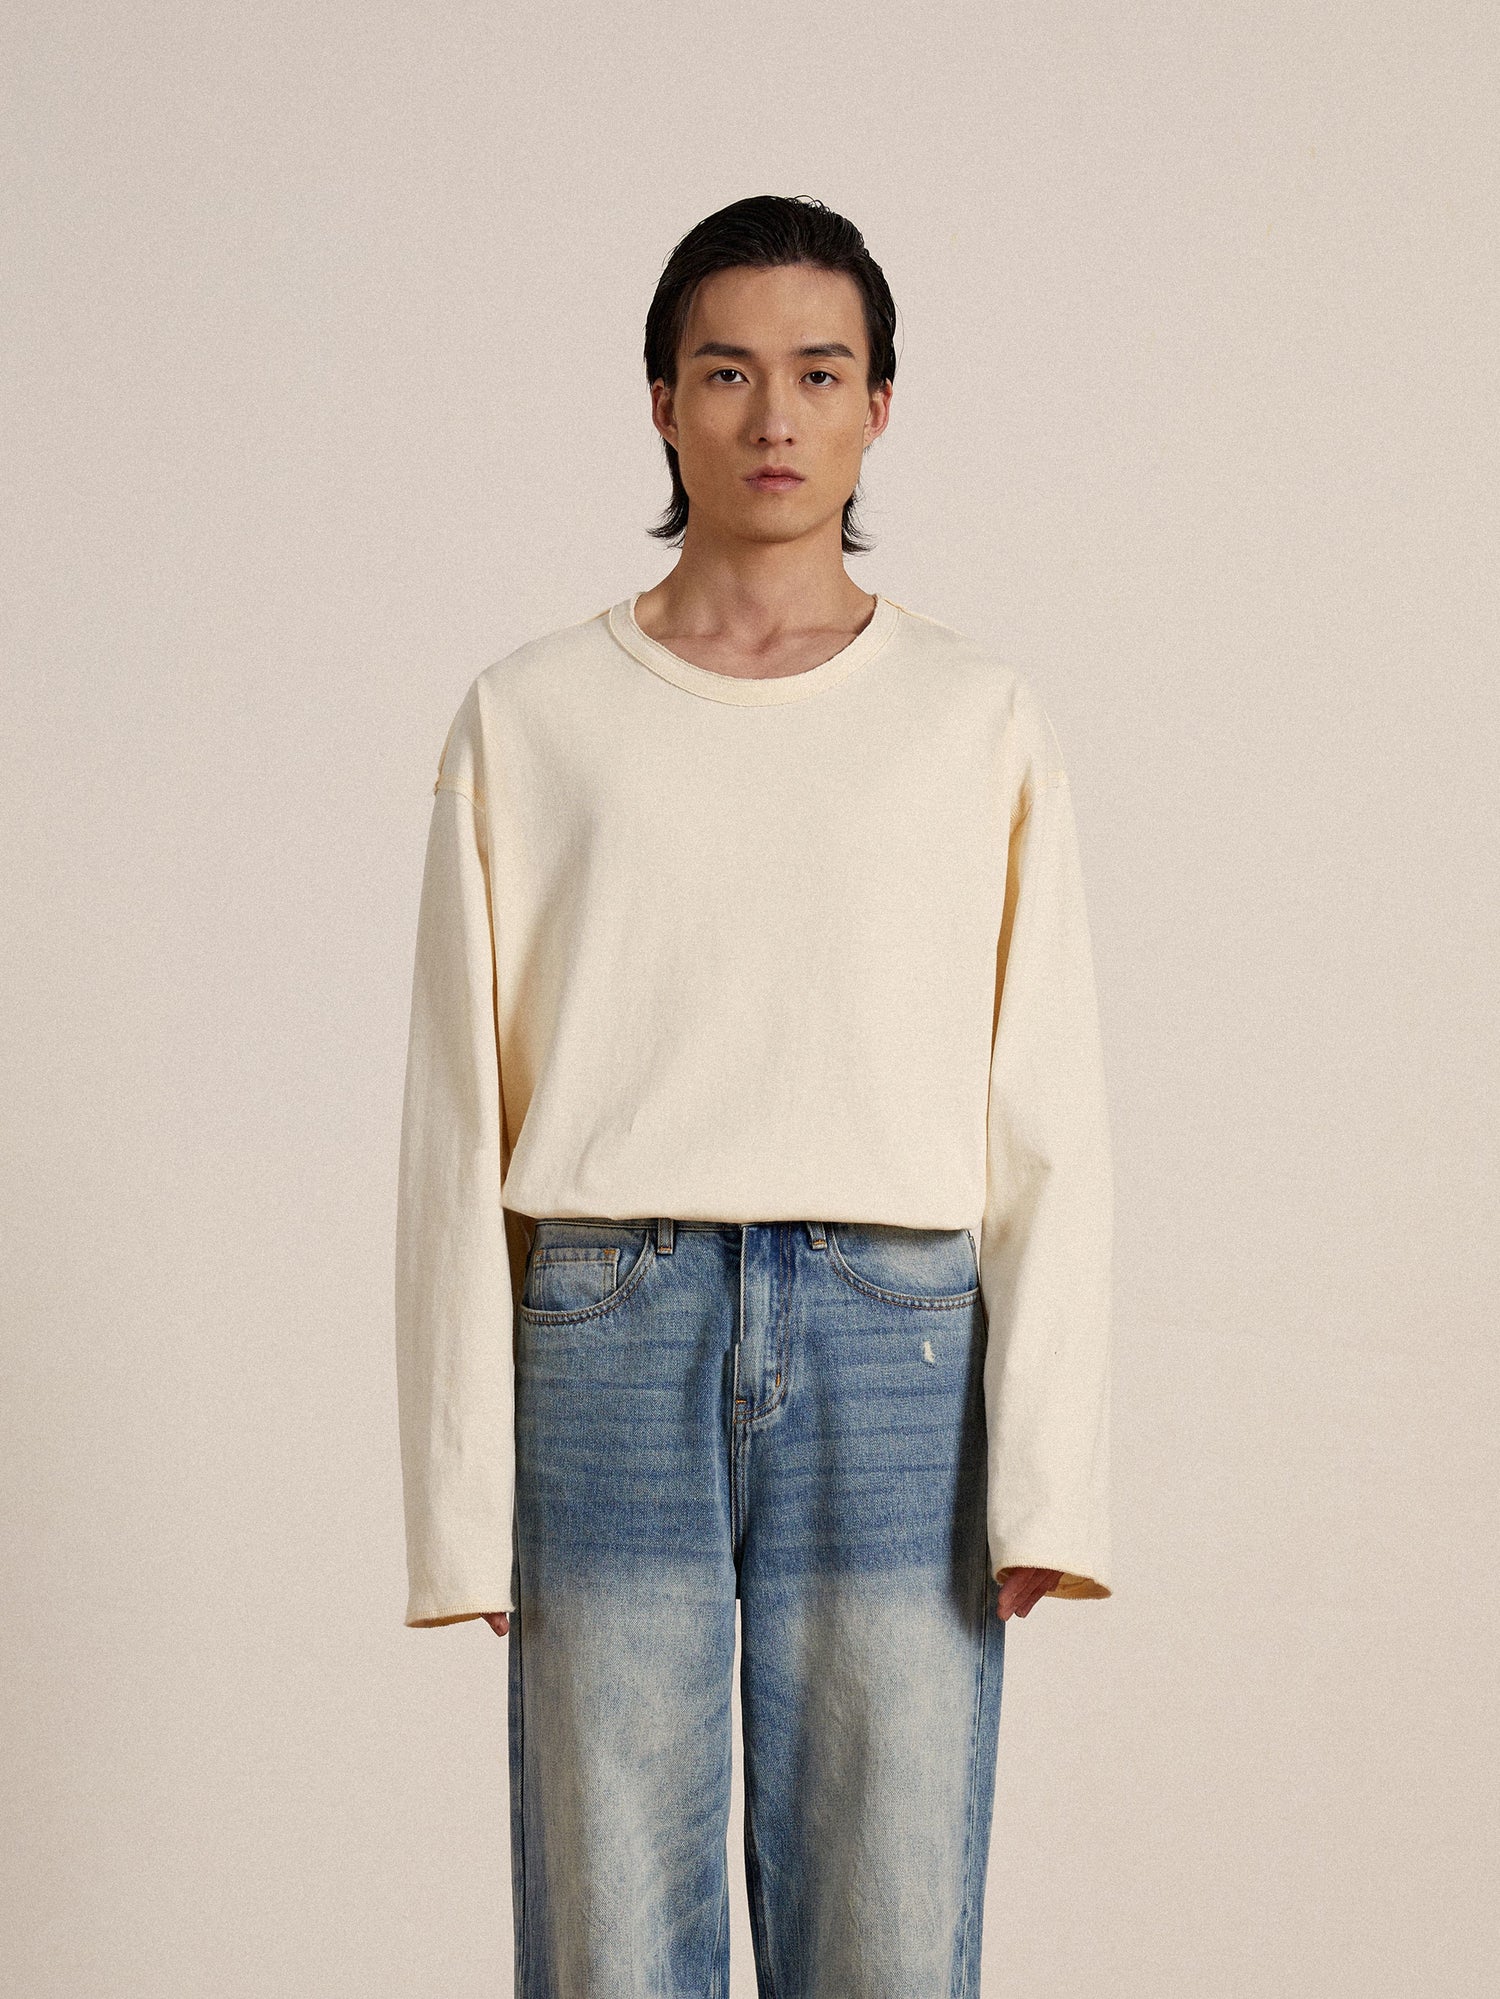 The model is wearing a cream Reversed LS Tee by Profound with reversed seams and blue jeans.